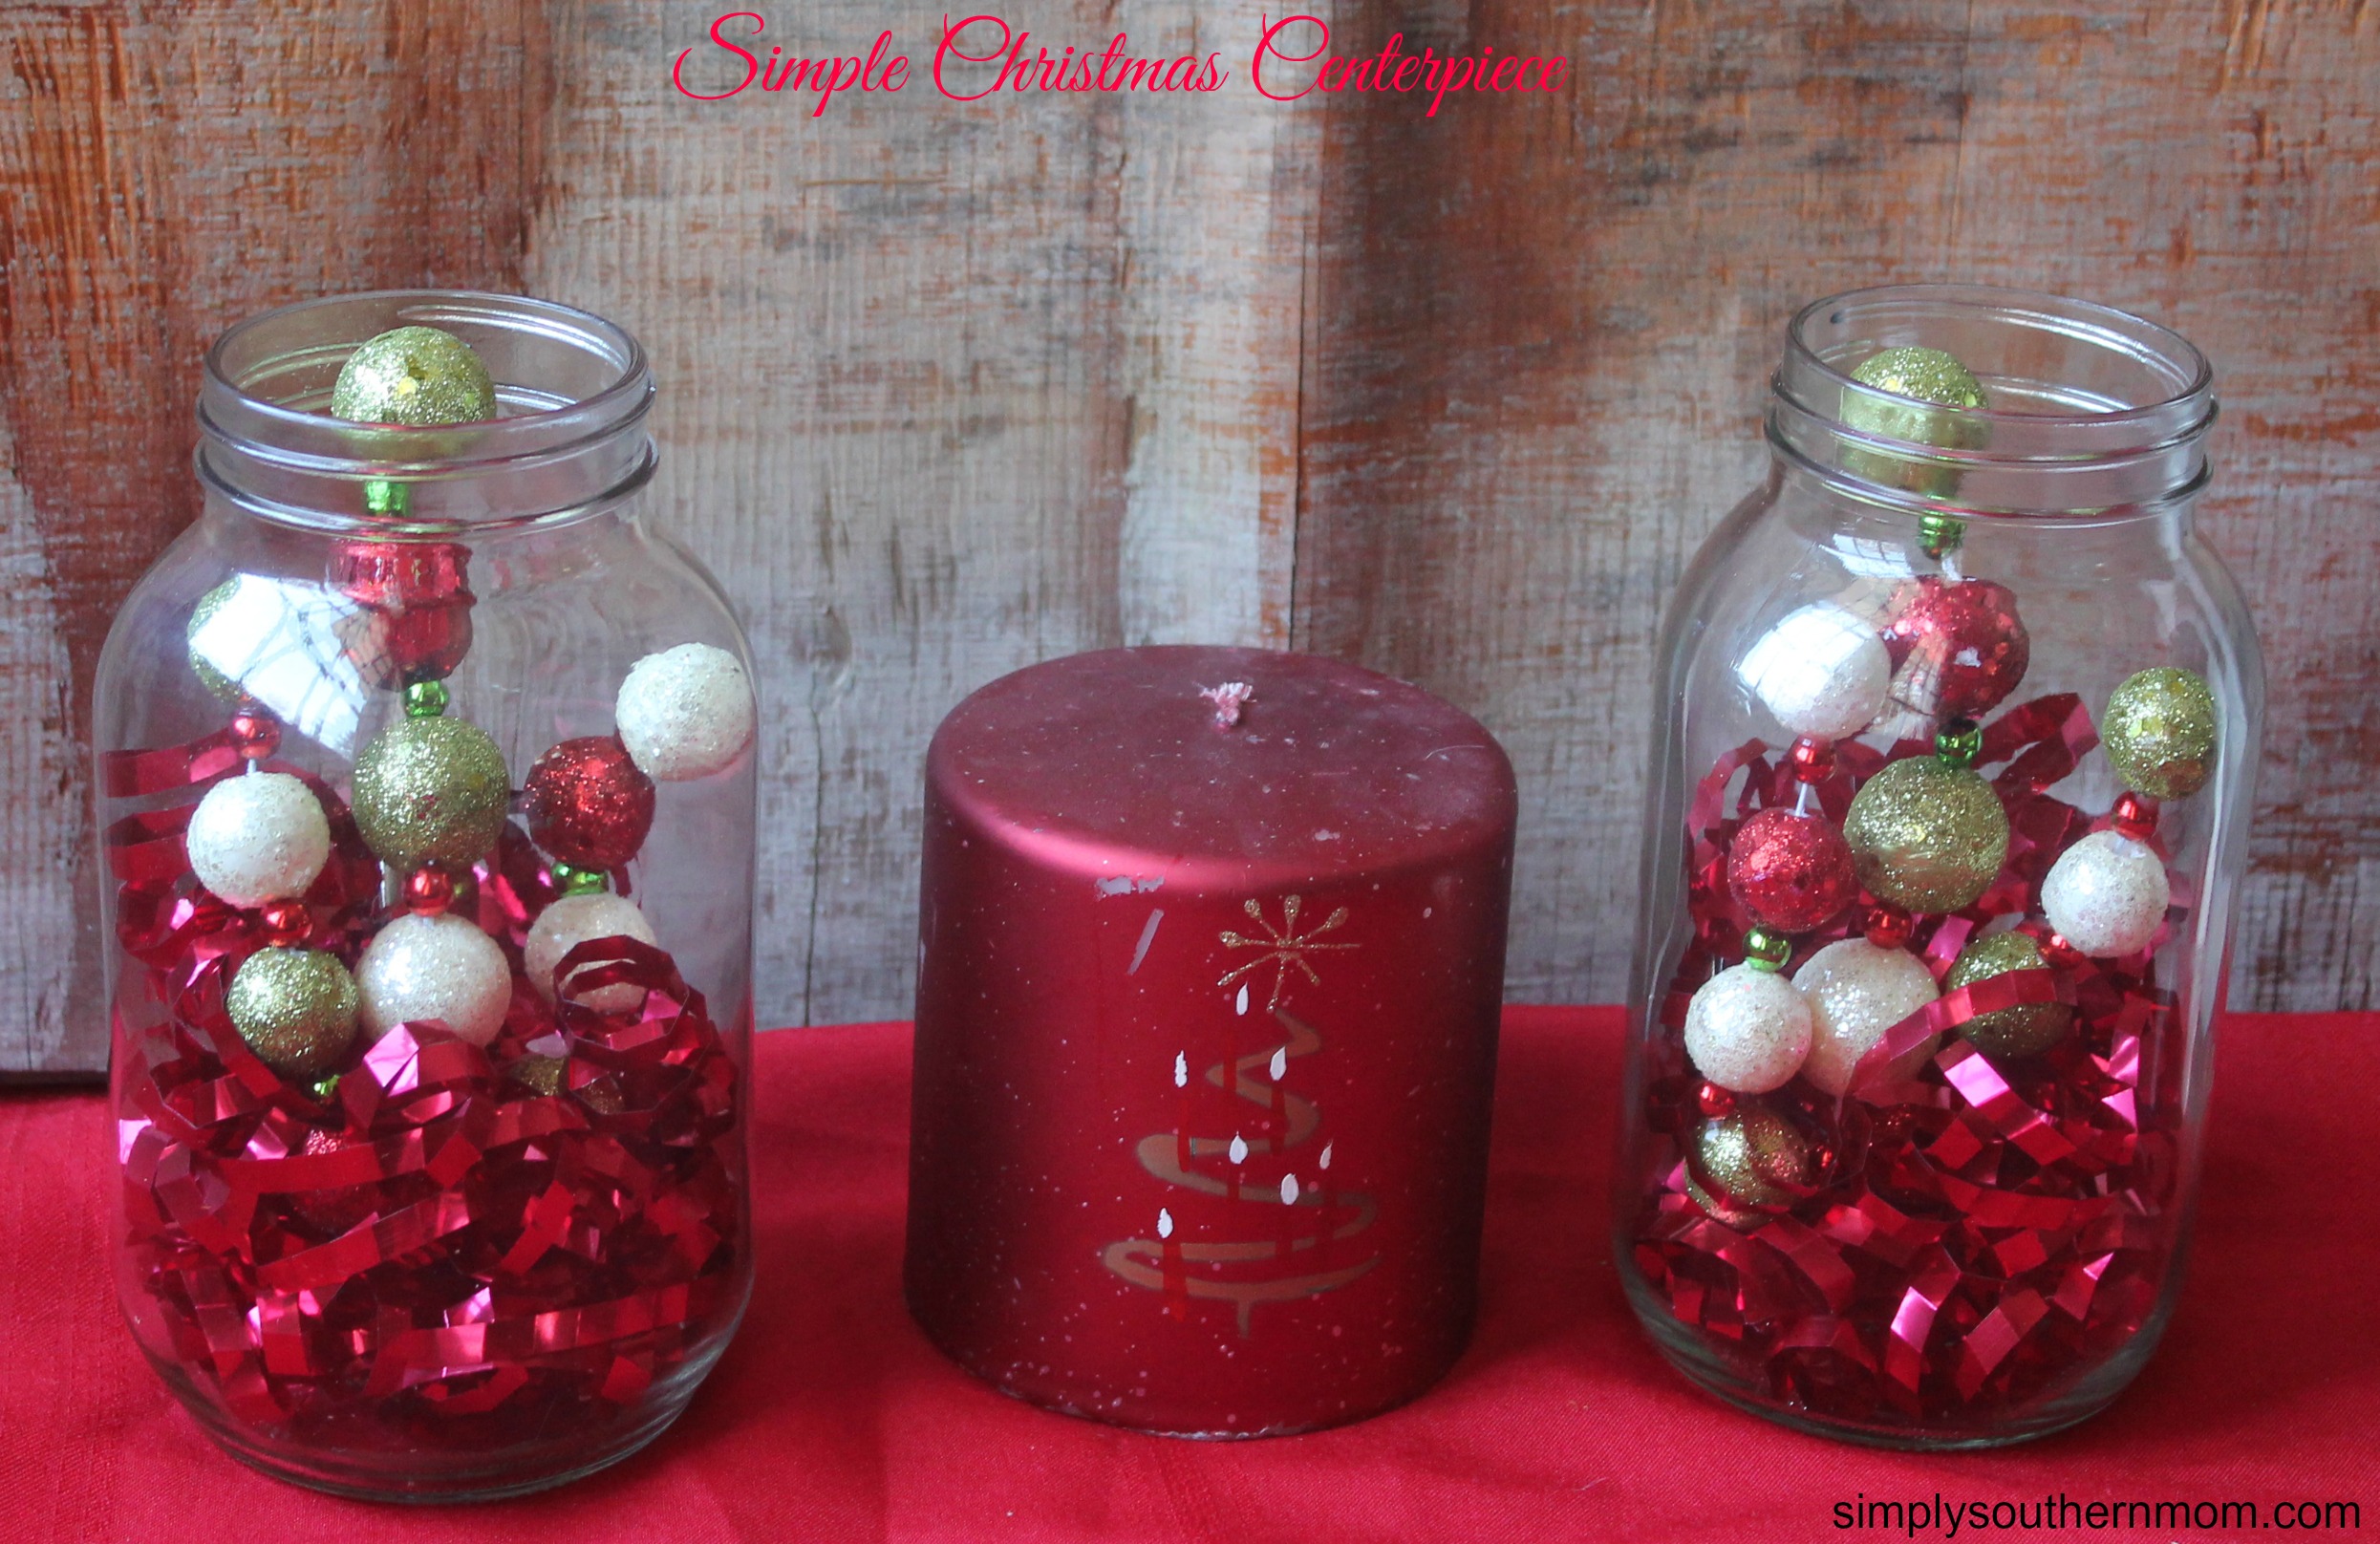 How to Create the Best DIY Christmas Centerpiece – Simply2moms